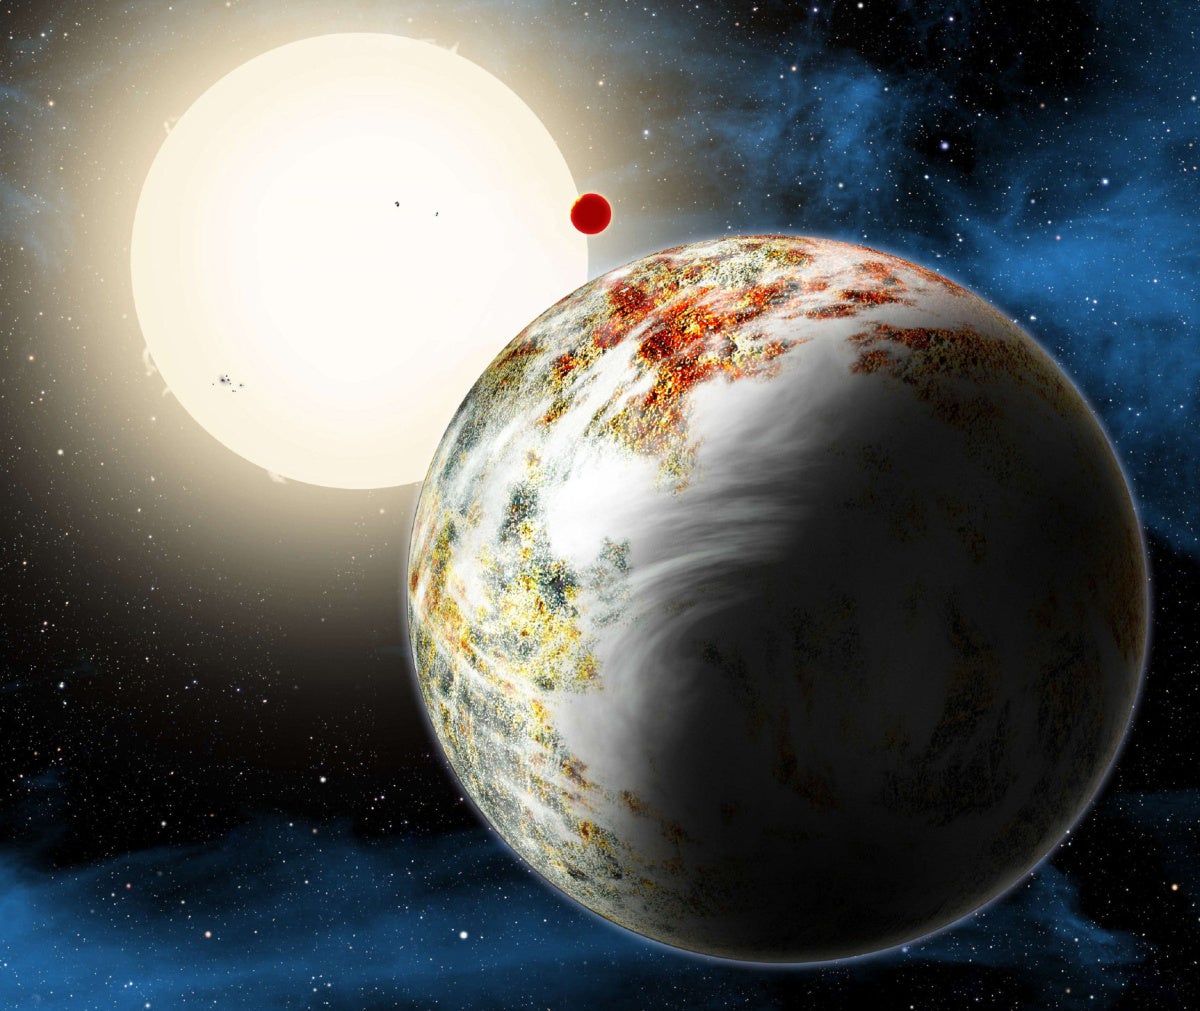 An artist's impression of the newly-discovered planet